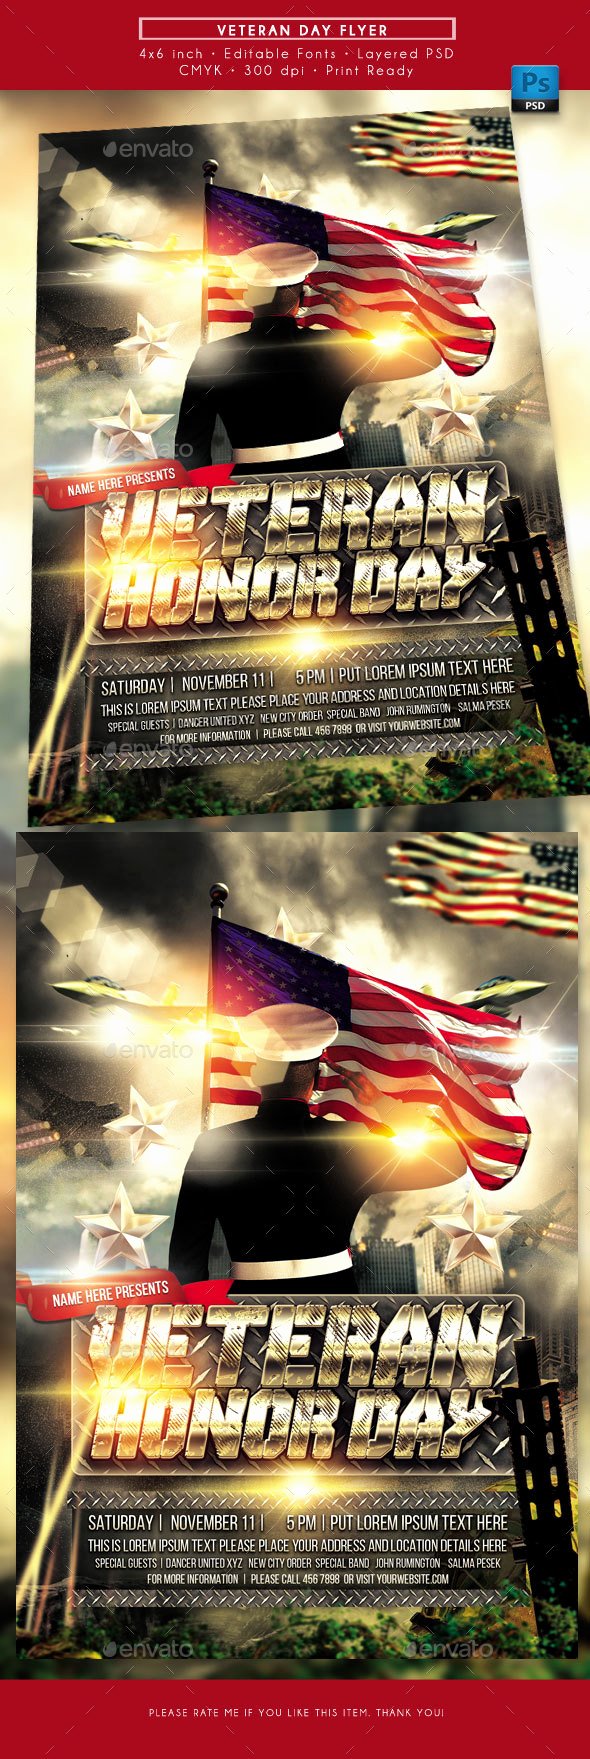 Veterans Day Flyer Template Free Inspirational Veterans Day Flyer by Rudydesign